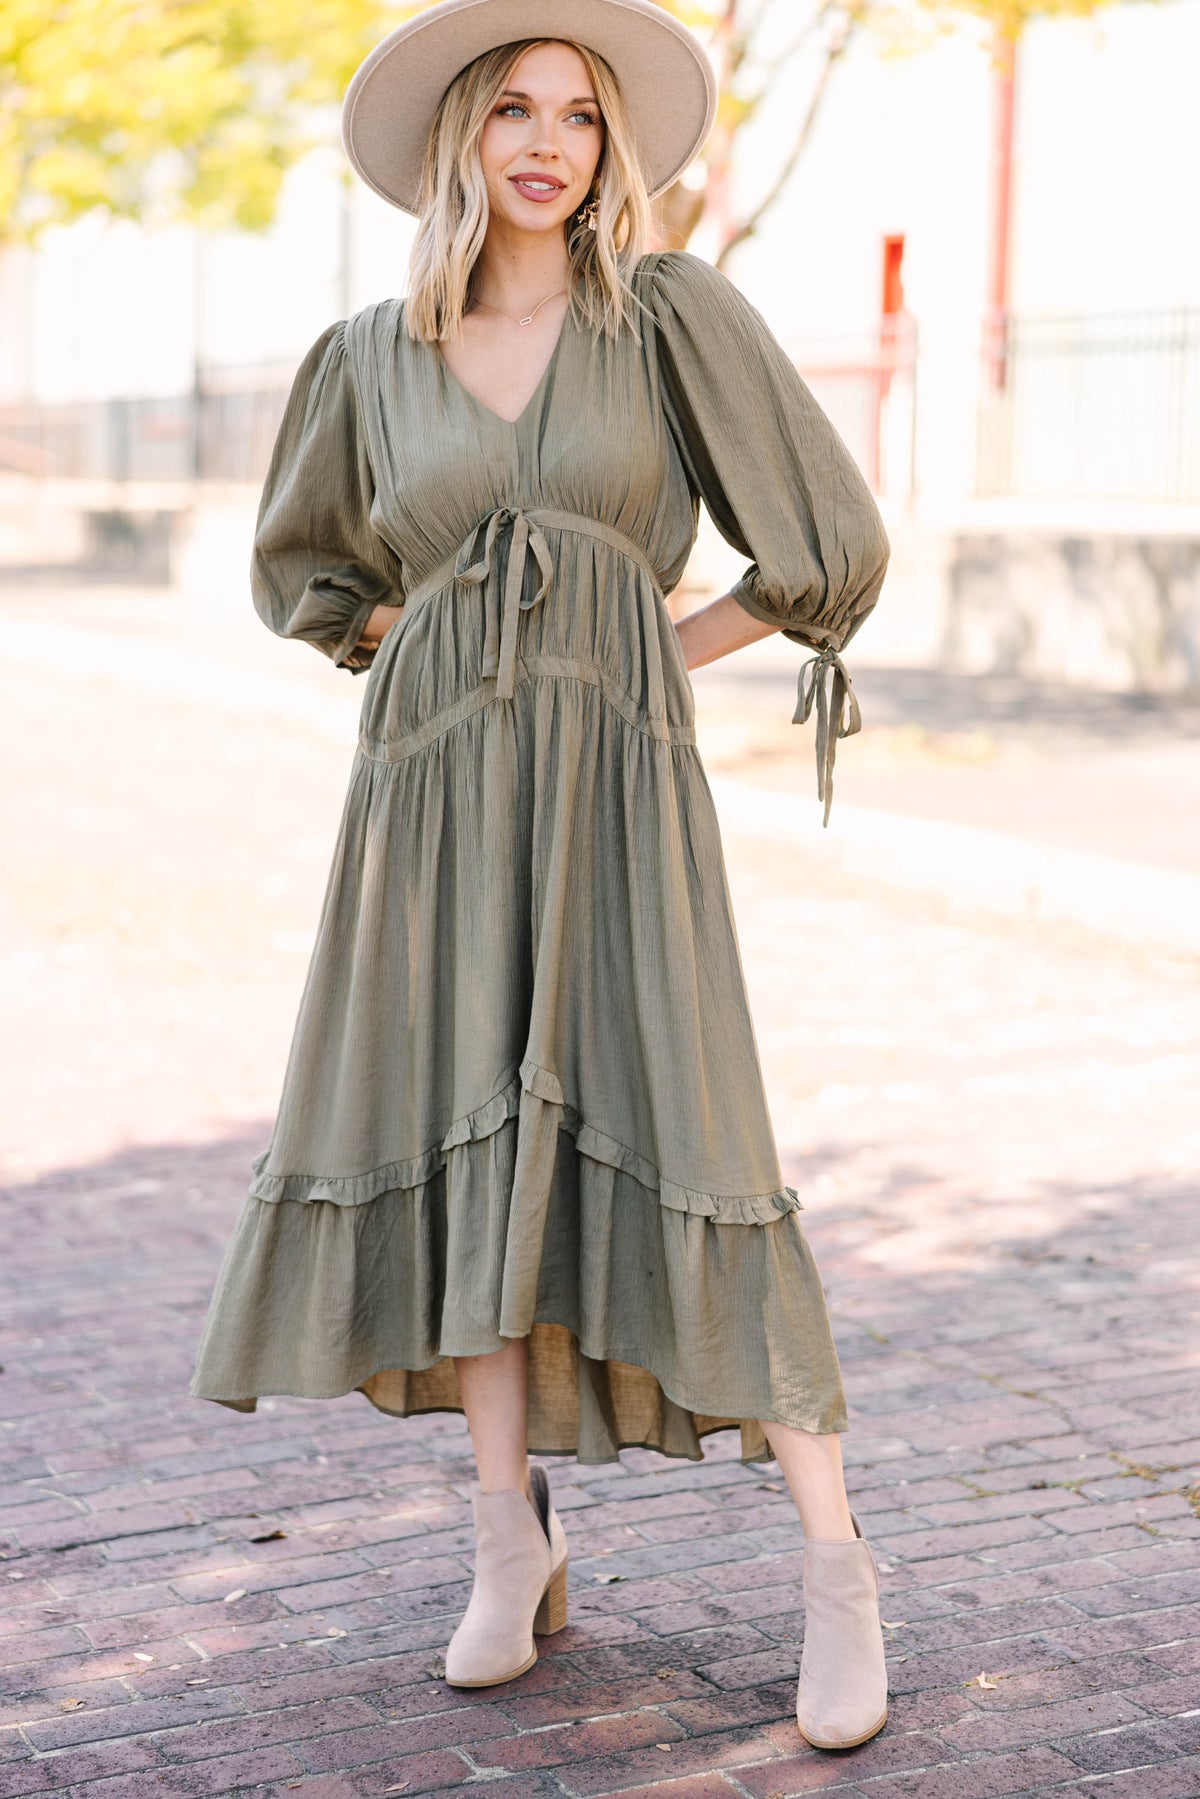 Be Your All Vintage Olive Green Midi Dress – Shop the Mint